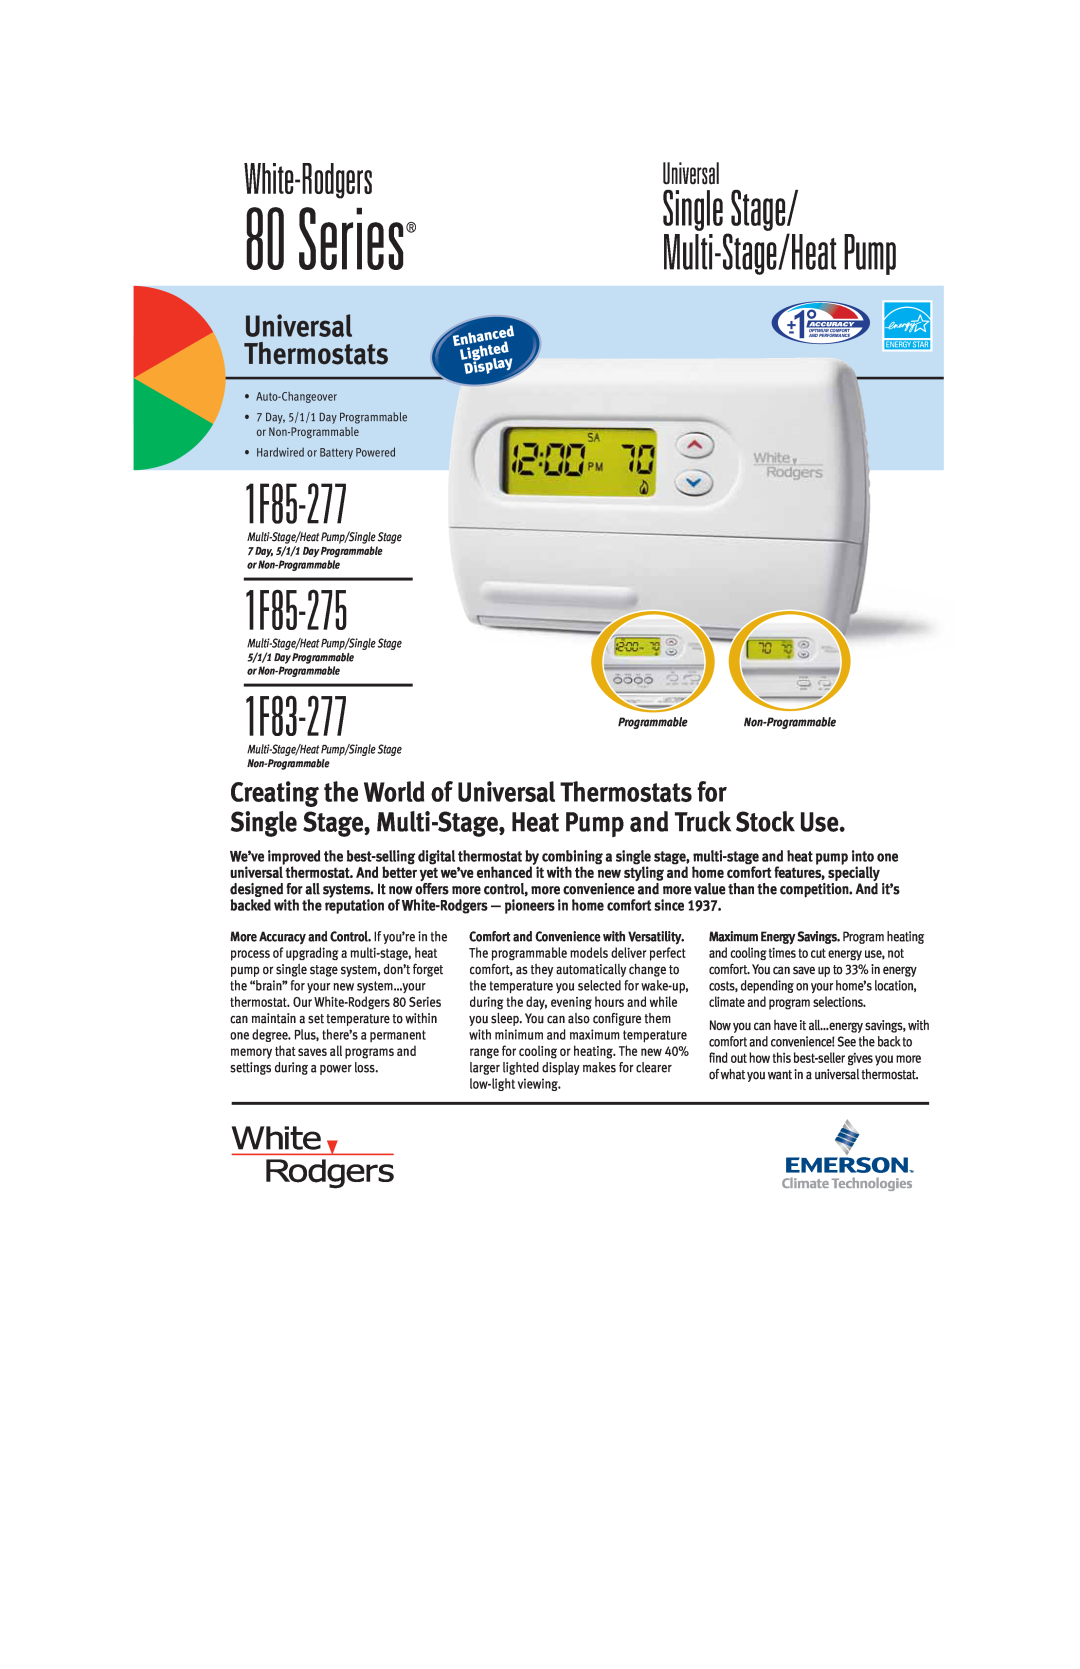 Emerson 80 Series manual White-Rodgers, 1F85-277, 1F85-275, 1F83-277, Single Stage, Universal Thermostats, Enhanced 